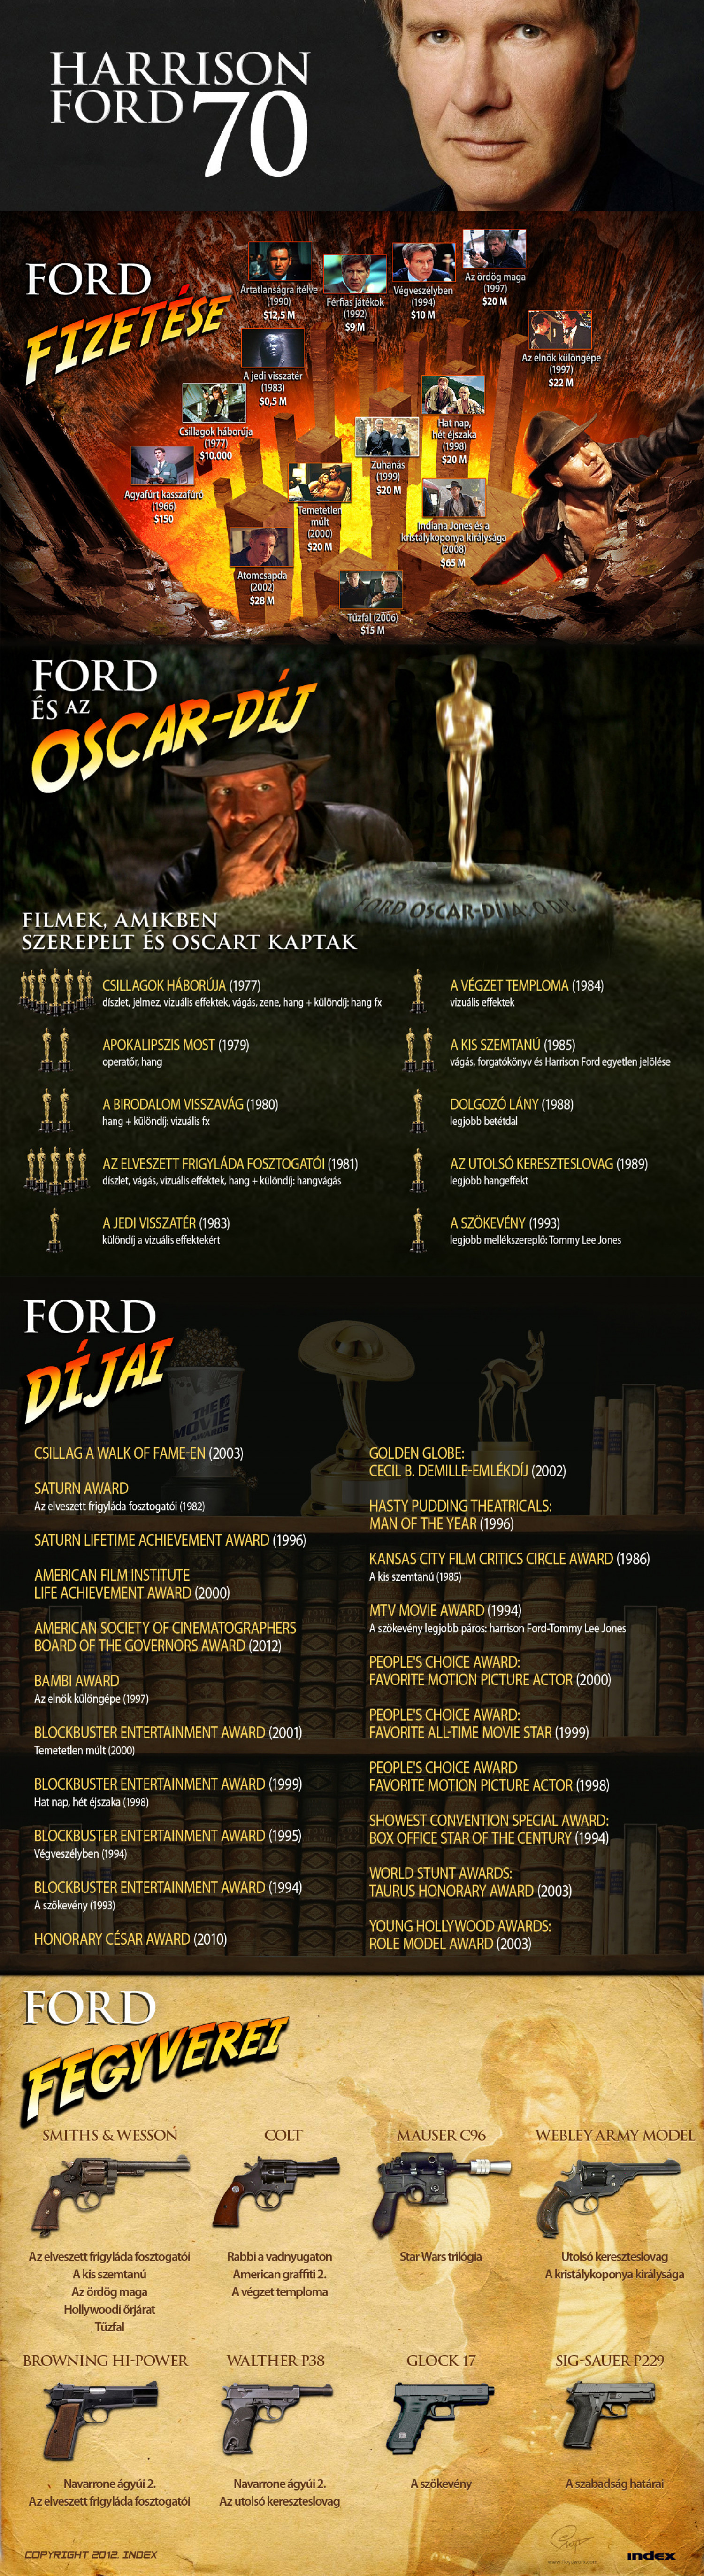 Harrison Ford 70 Infographic